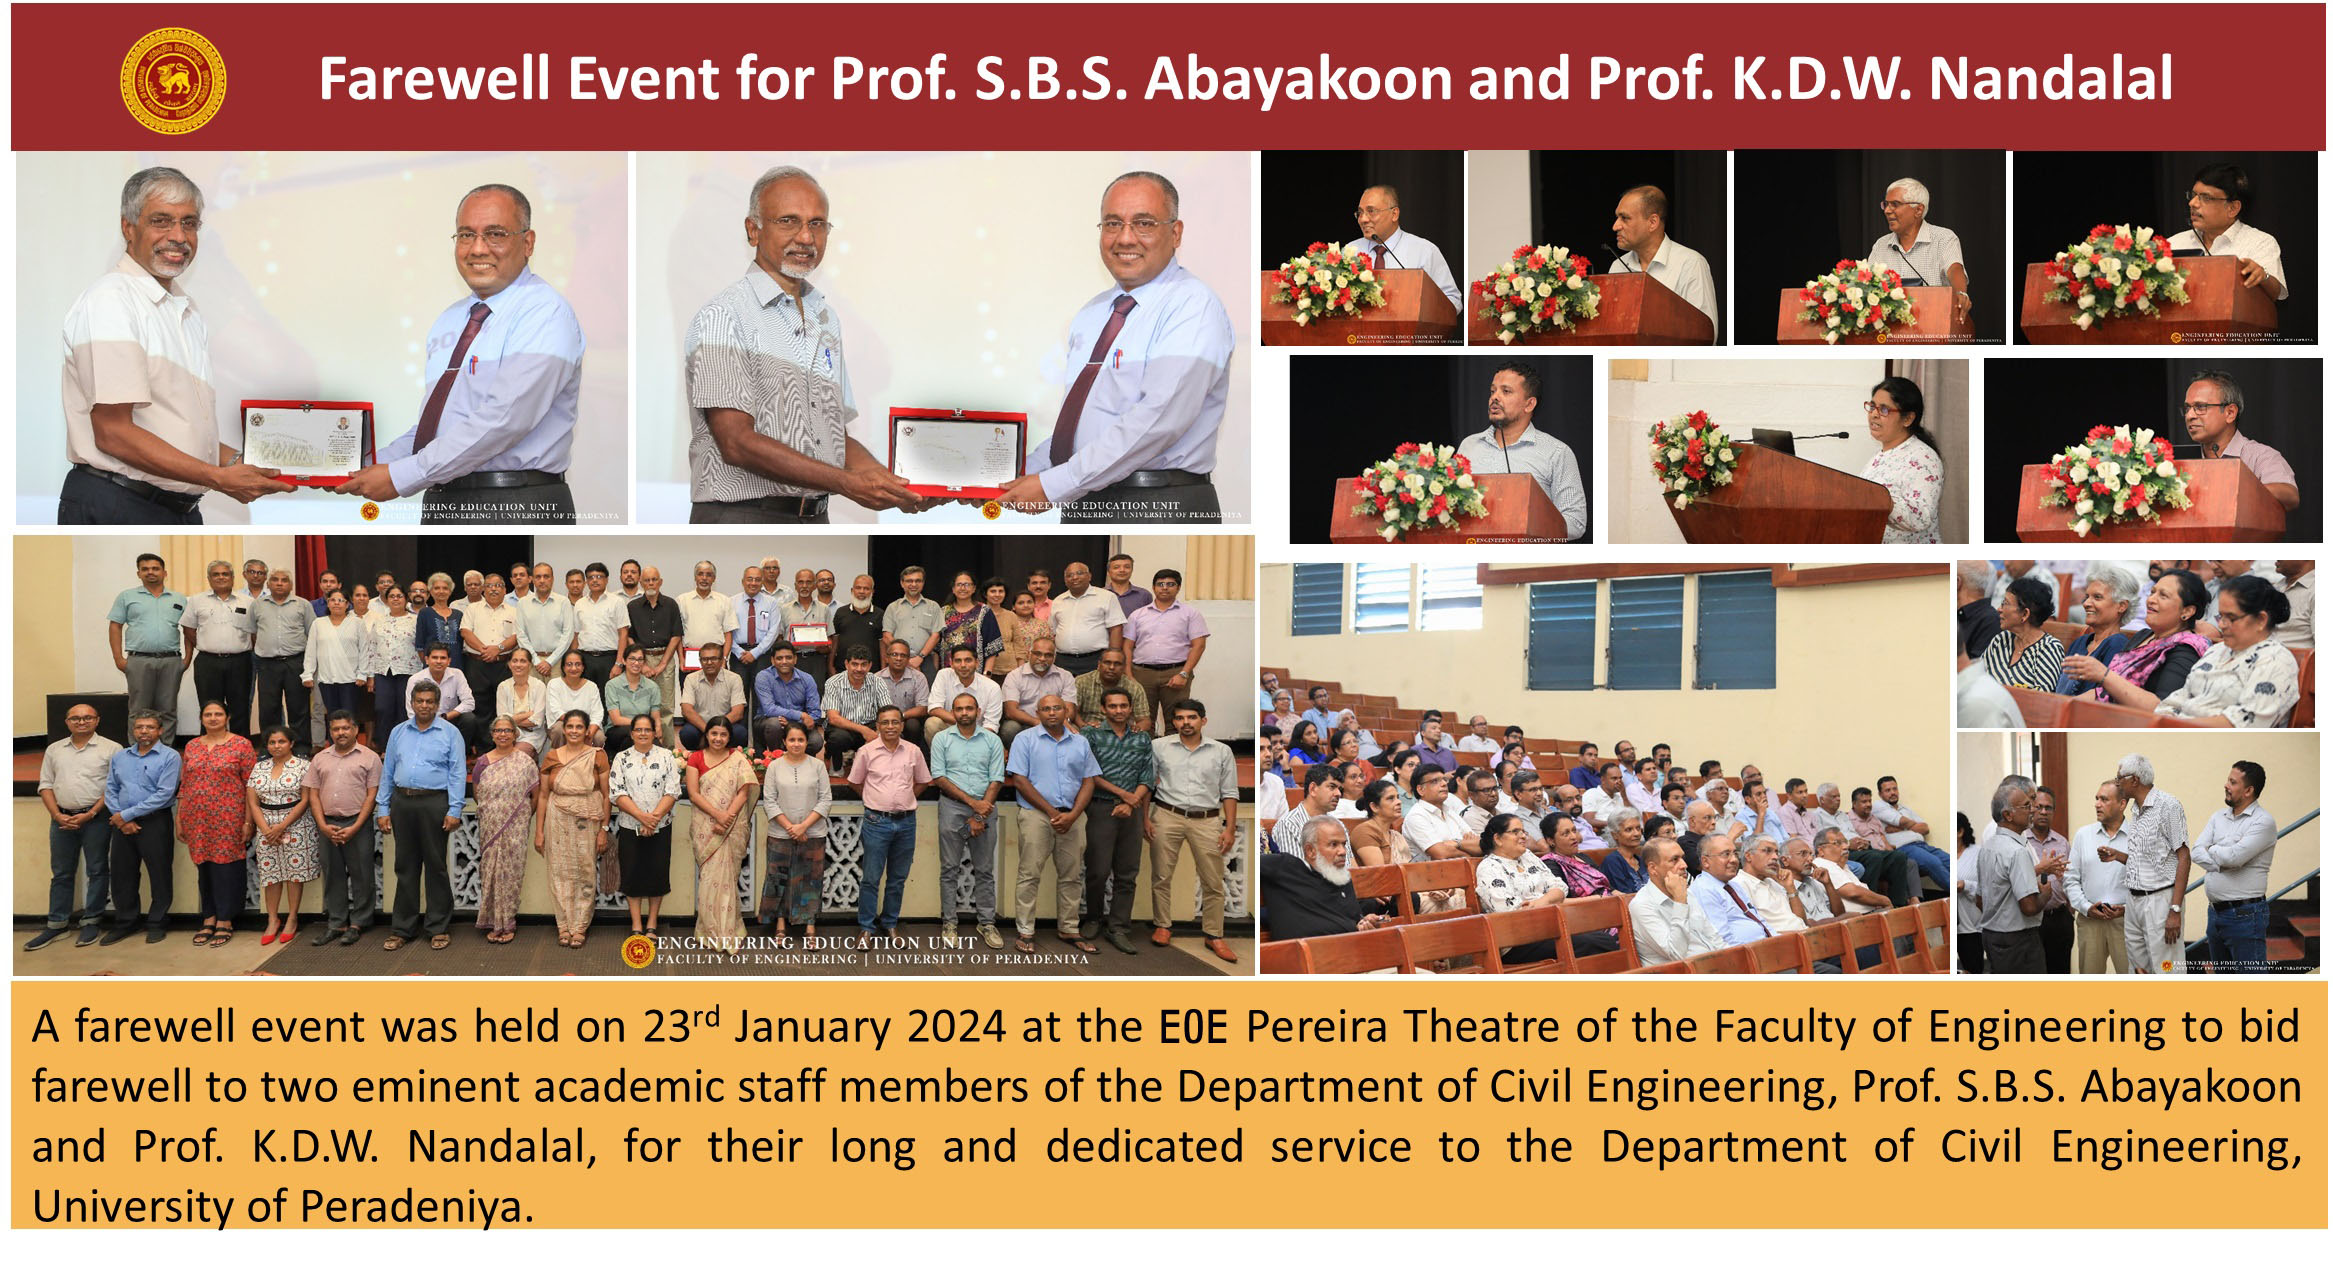 Farewell Event for Prof. S.B.S. Abayakoon and Prof. K.D.W. Nandalal